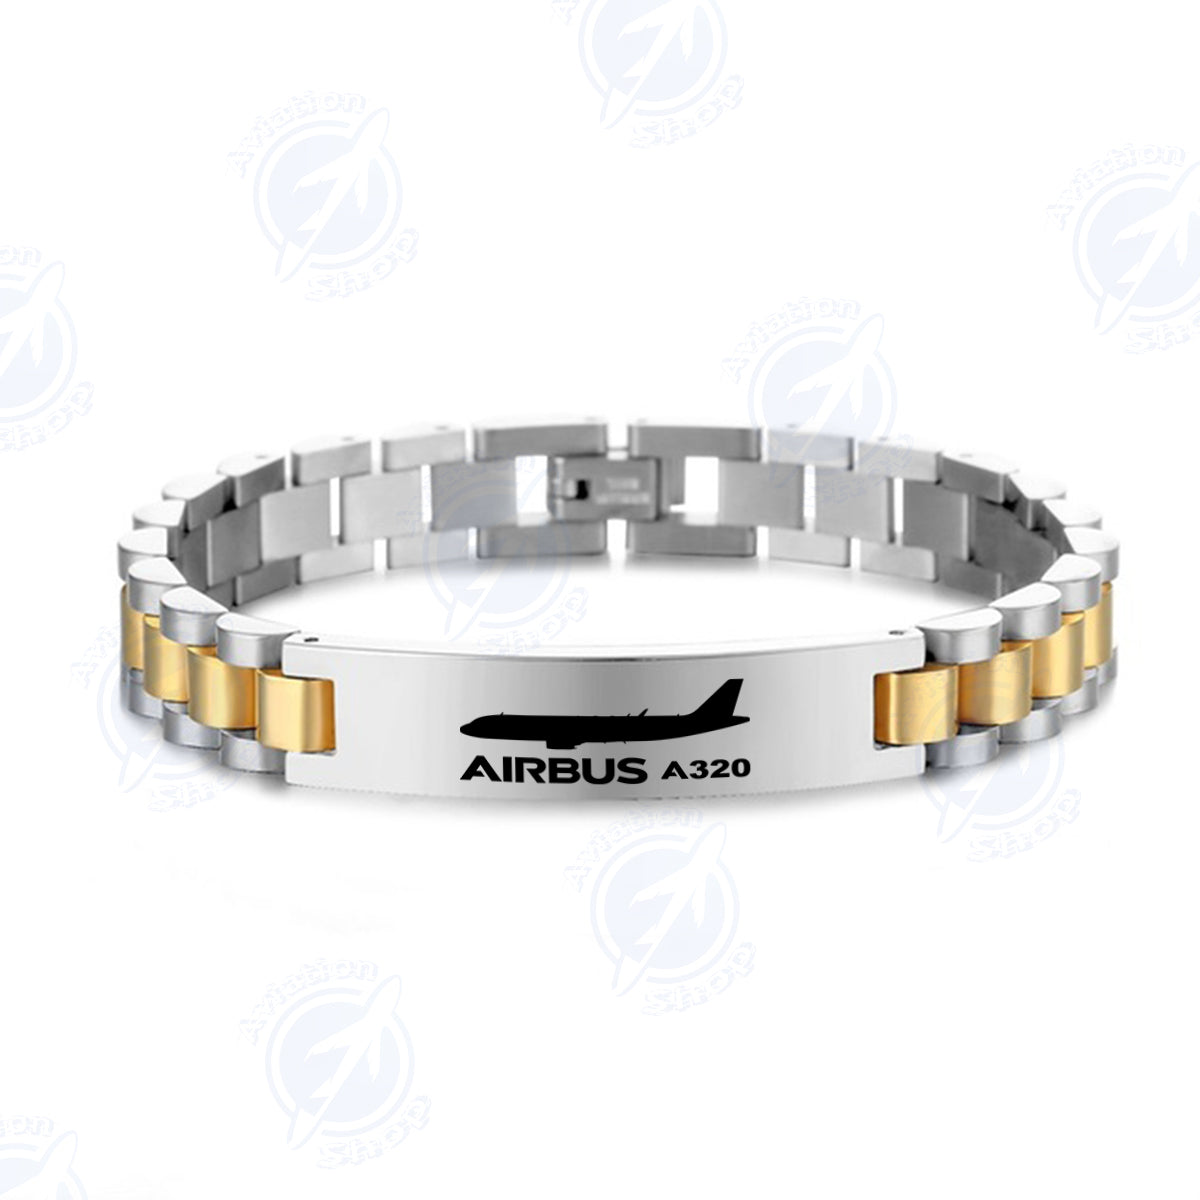 The Airbus A320 Designed Stainless Steel Chain Bracelets